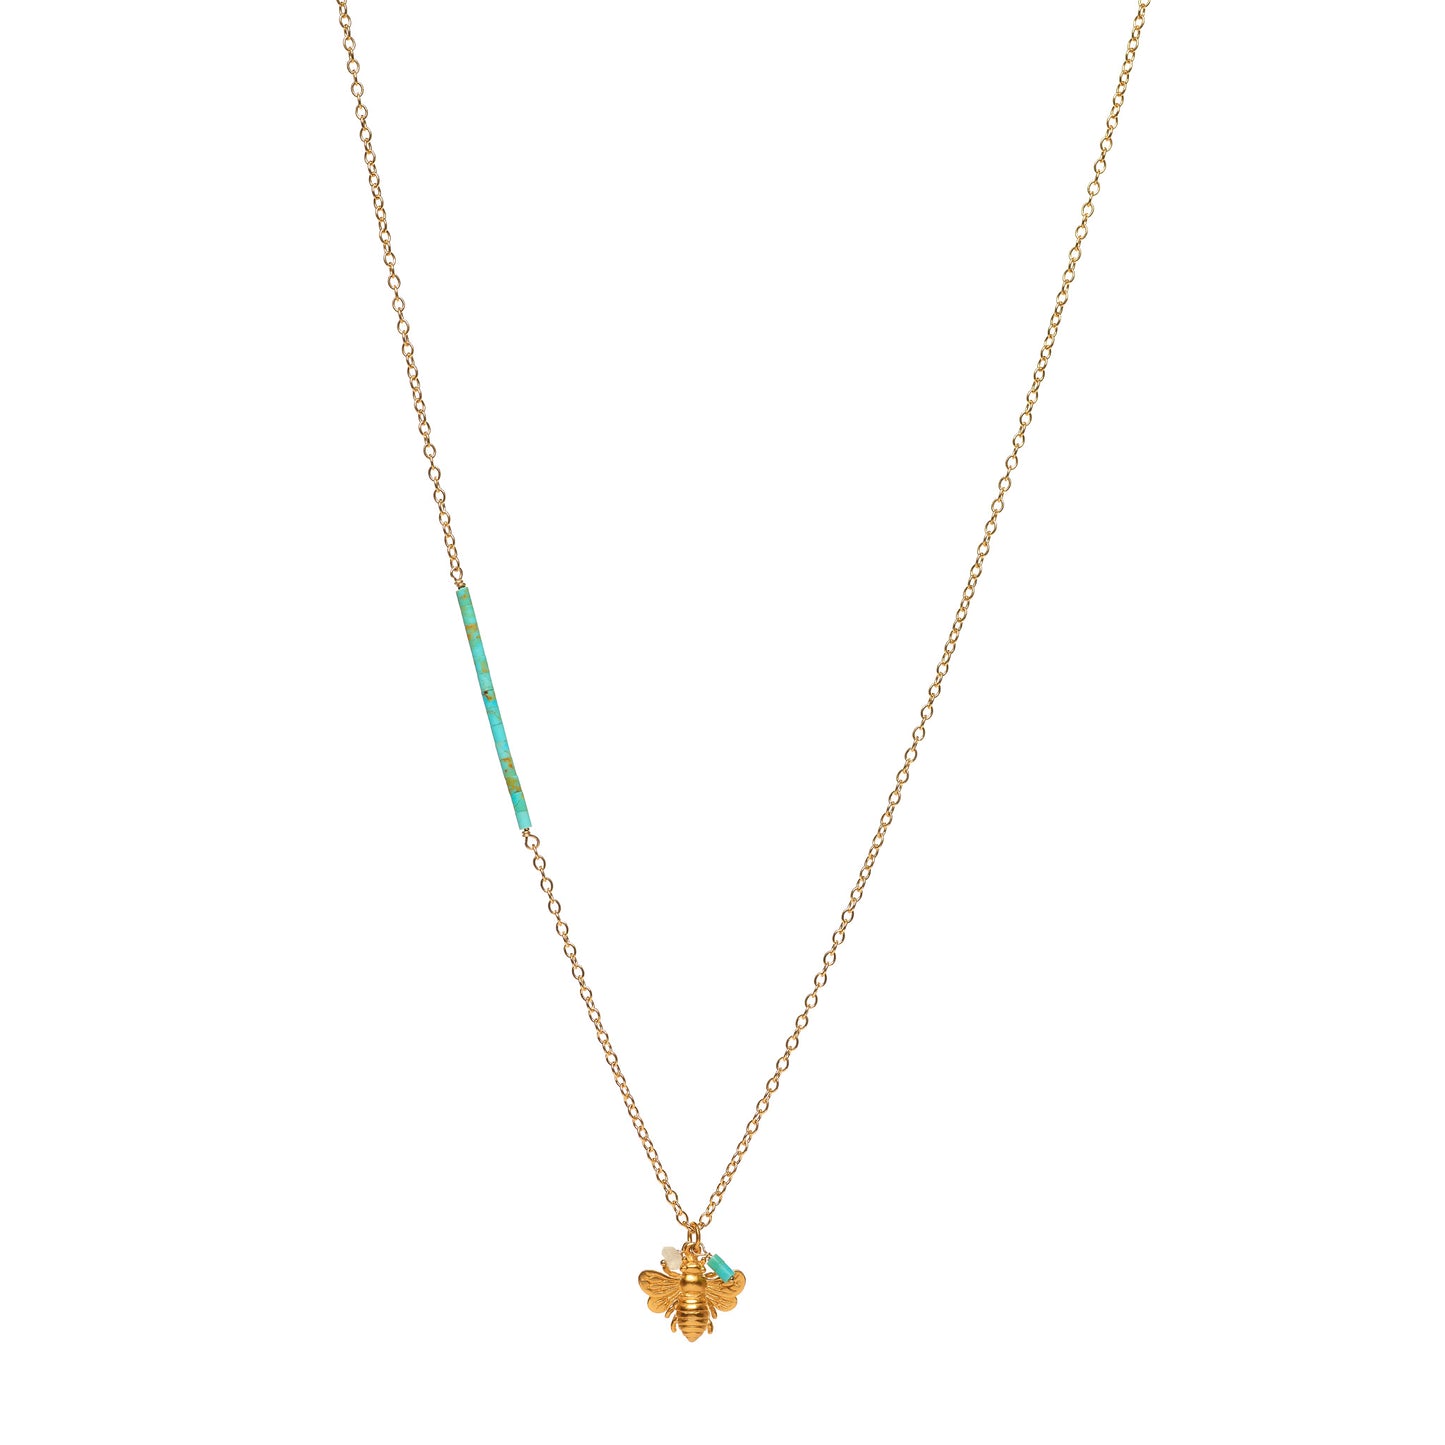 Heishi on Gold Filled Chain with Small Bee